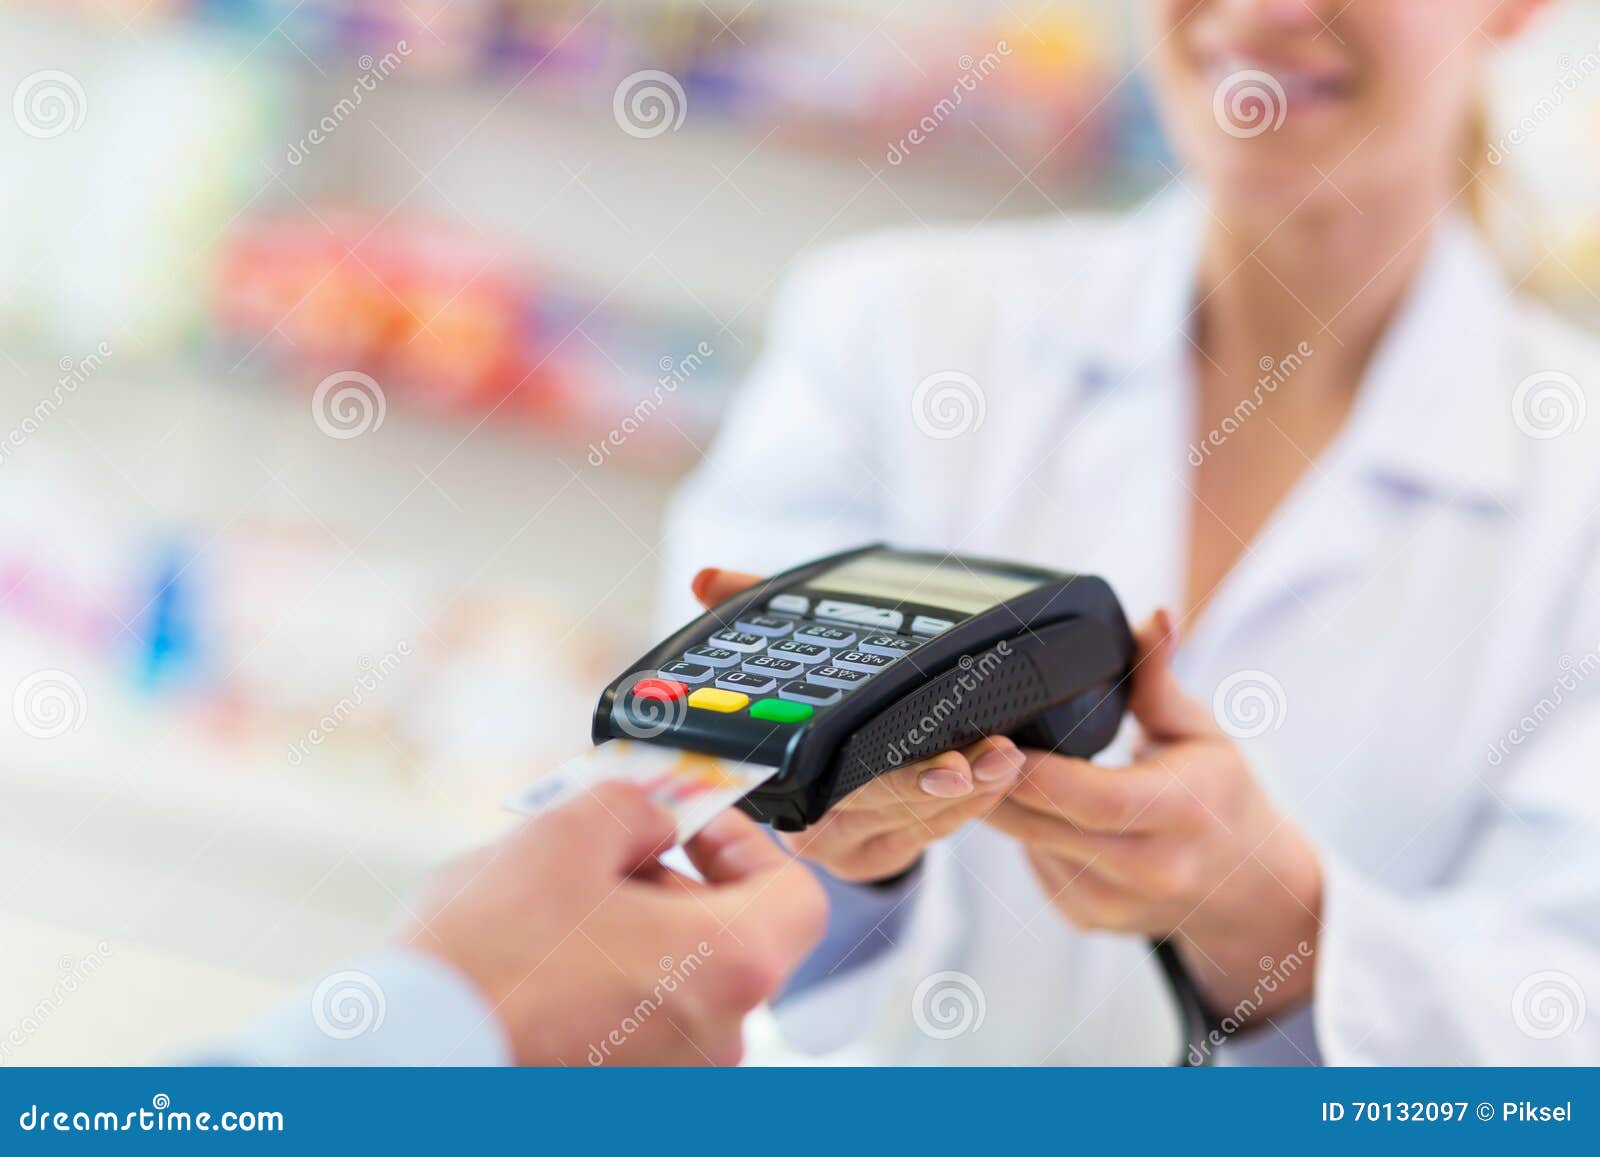 paying in the pharmacy